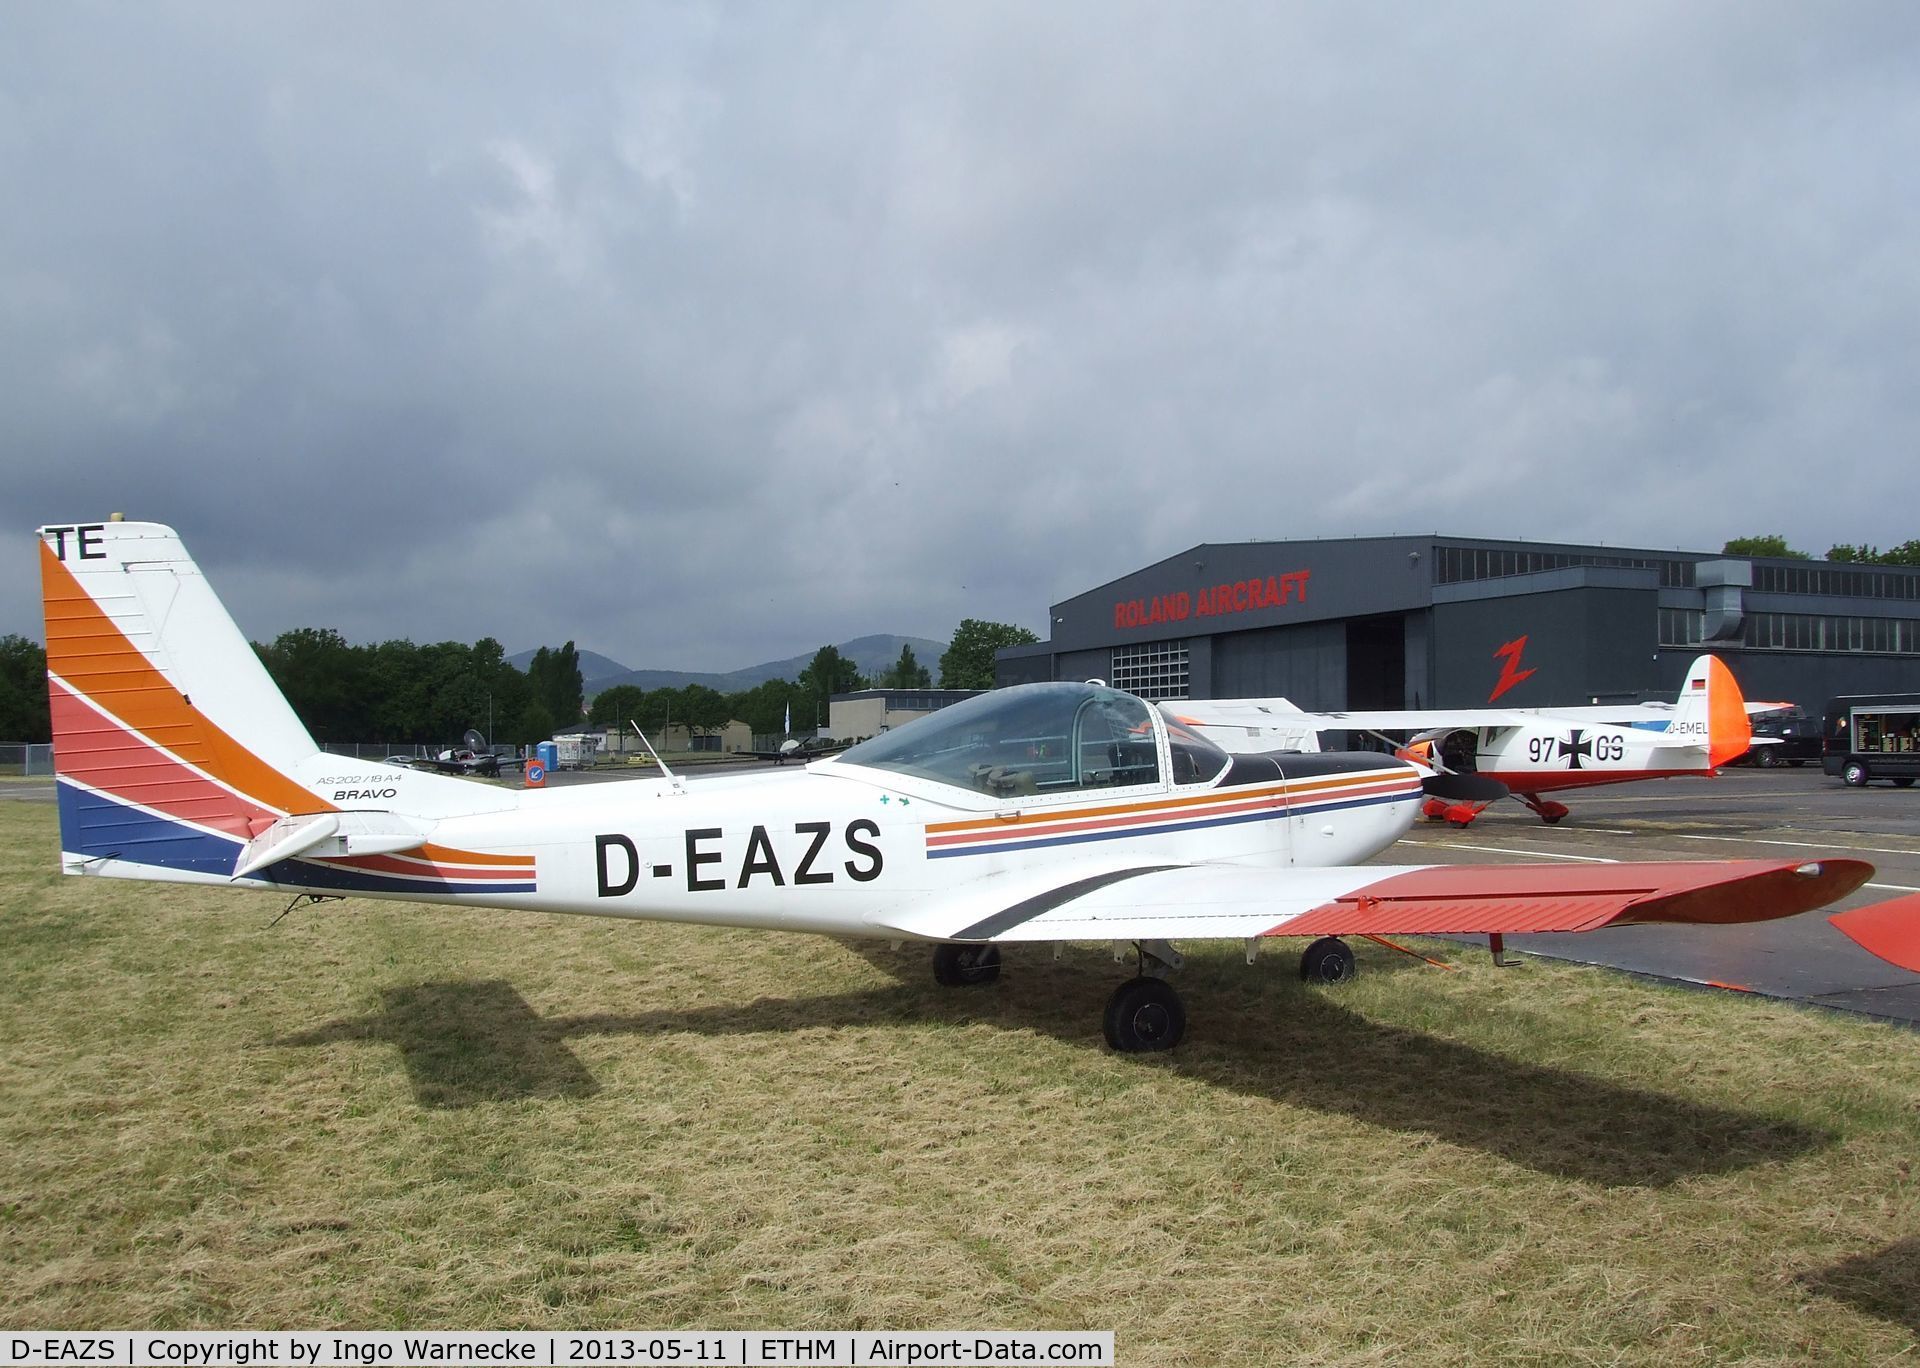 D-EAZS, 1987 FFA AS-202/18A-4 Bravo C/N 224, FFA AS.202/18 A4 Bravo during an open day at the Fliegendes Museum Mendig (Flying Museum) at former German Army Aviation base, now civilian Mendig airfield